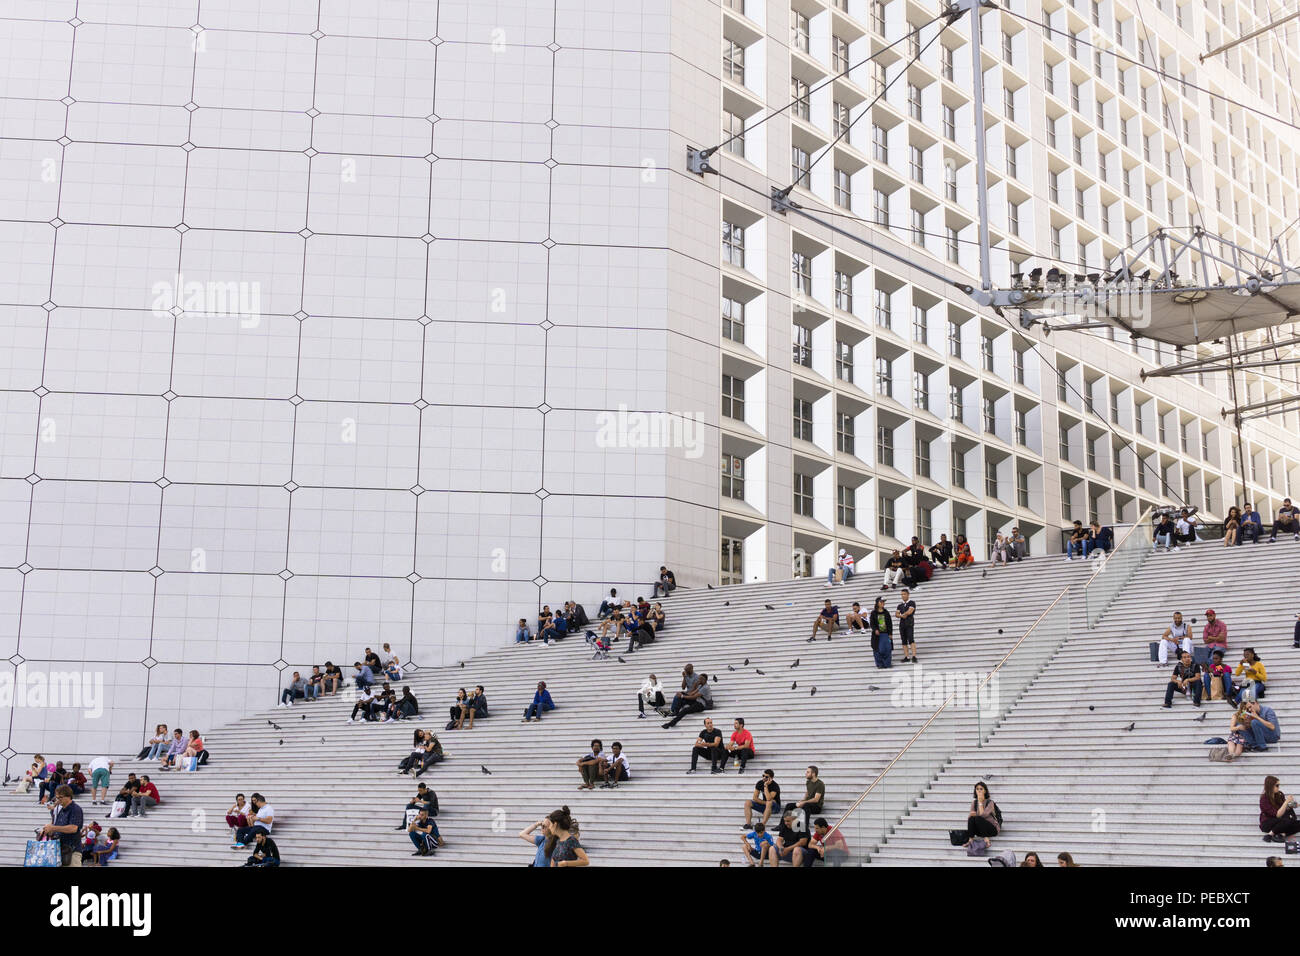 People sitting on stairs of La Grande Arche in La Defense area of Paris, France. Stock Photo